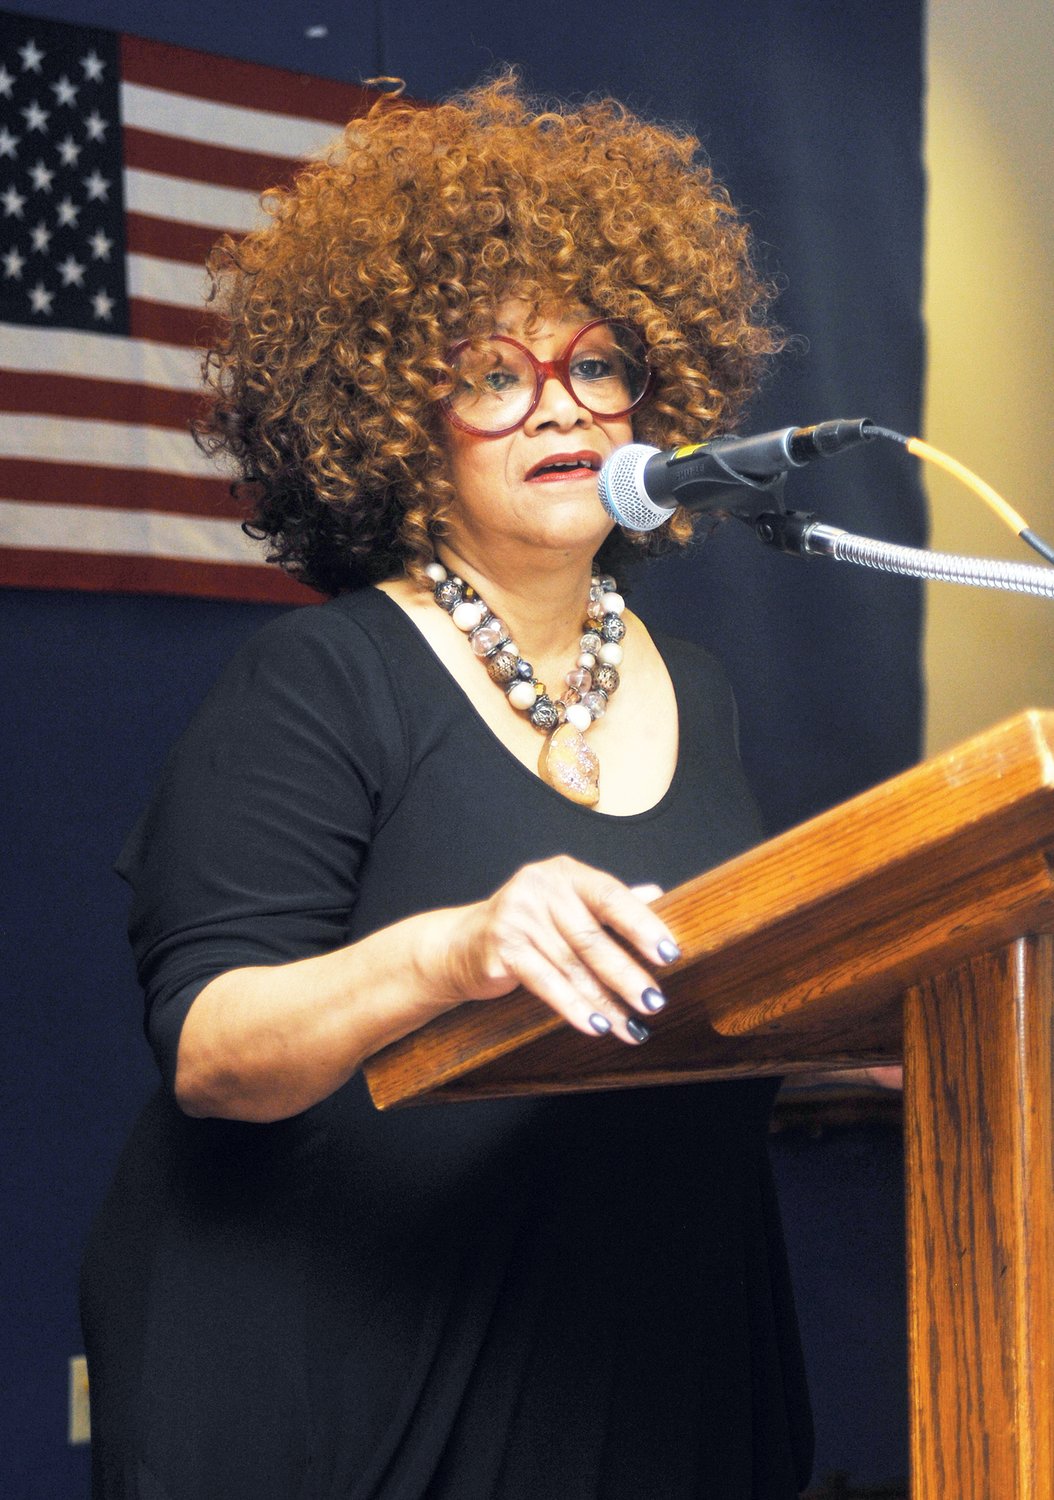 North Carolina Poet Laureate Jaki Shelton Green delivers an inspirational story of past hurts and future healing in a message at the Western Chatham Senior Center in Siler City Saturday for Chatham LIteracy's fall luncheon. ‘We are the authors of our own lives,’ Green said. 'Preserve your story from one to another, in the office, your job, your board meetings.’